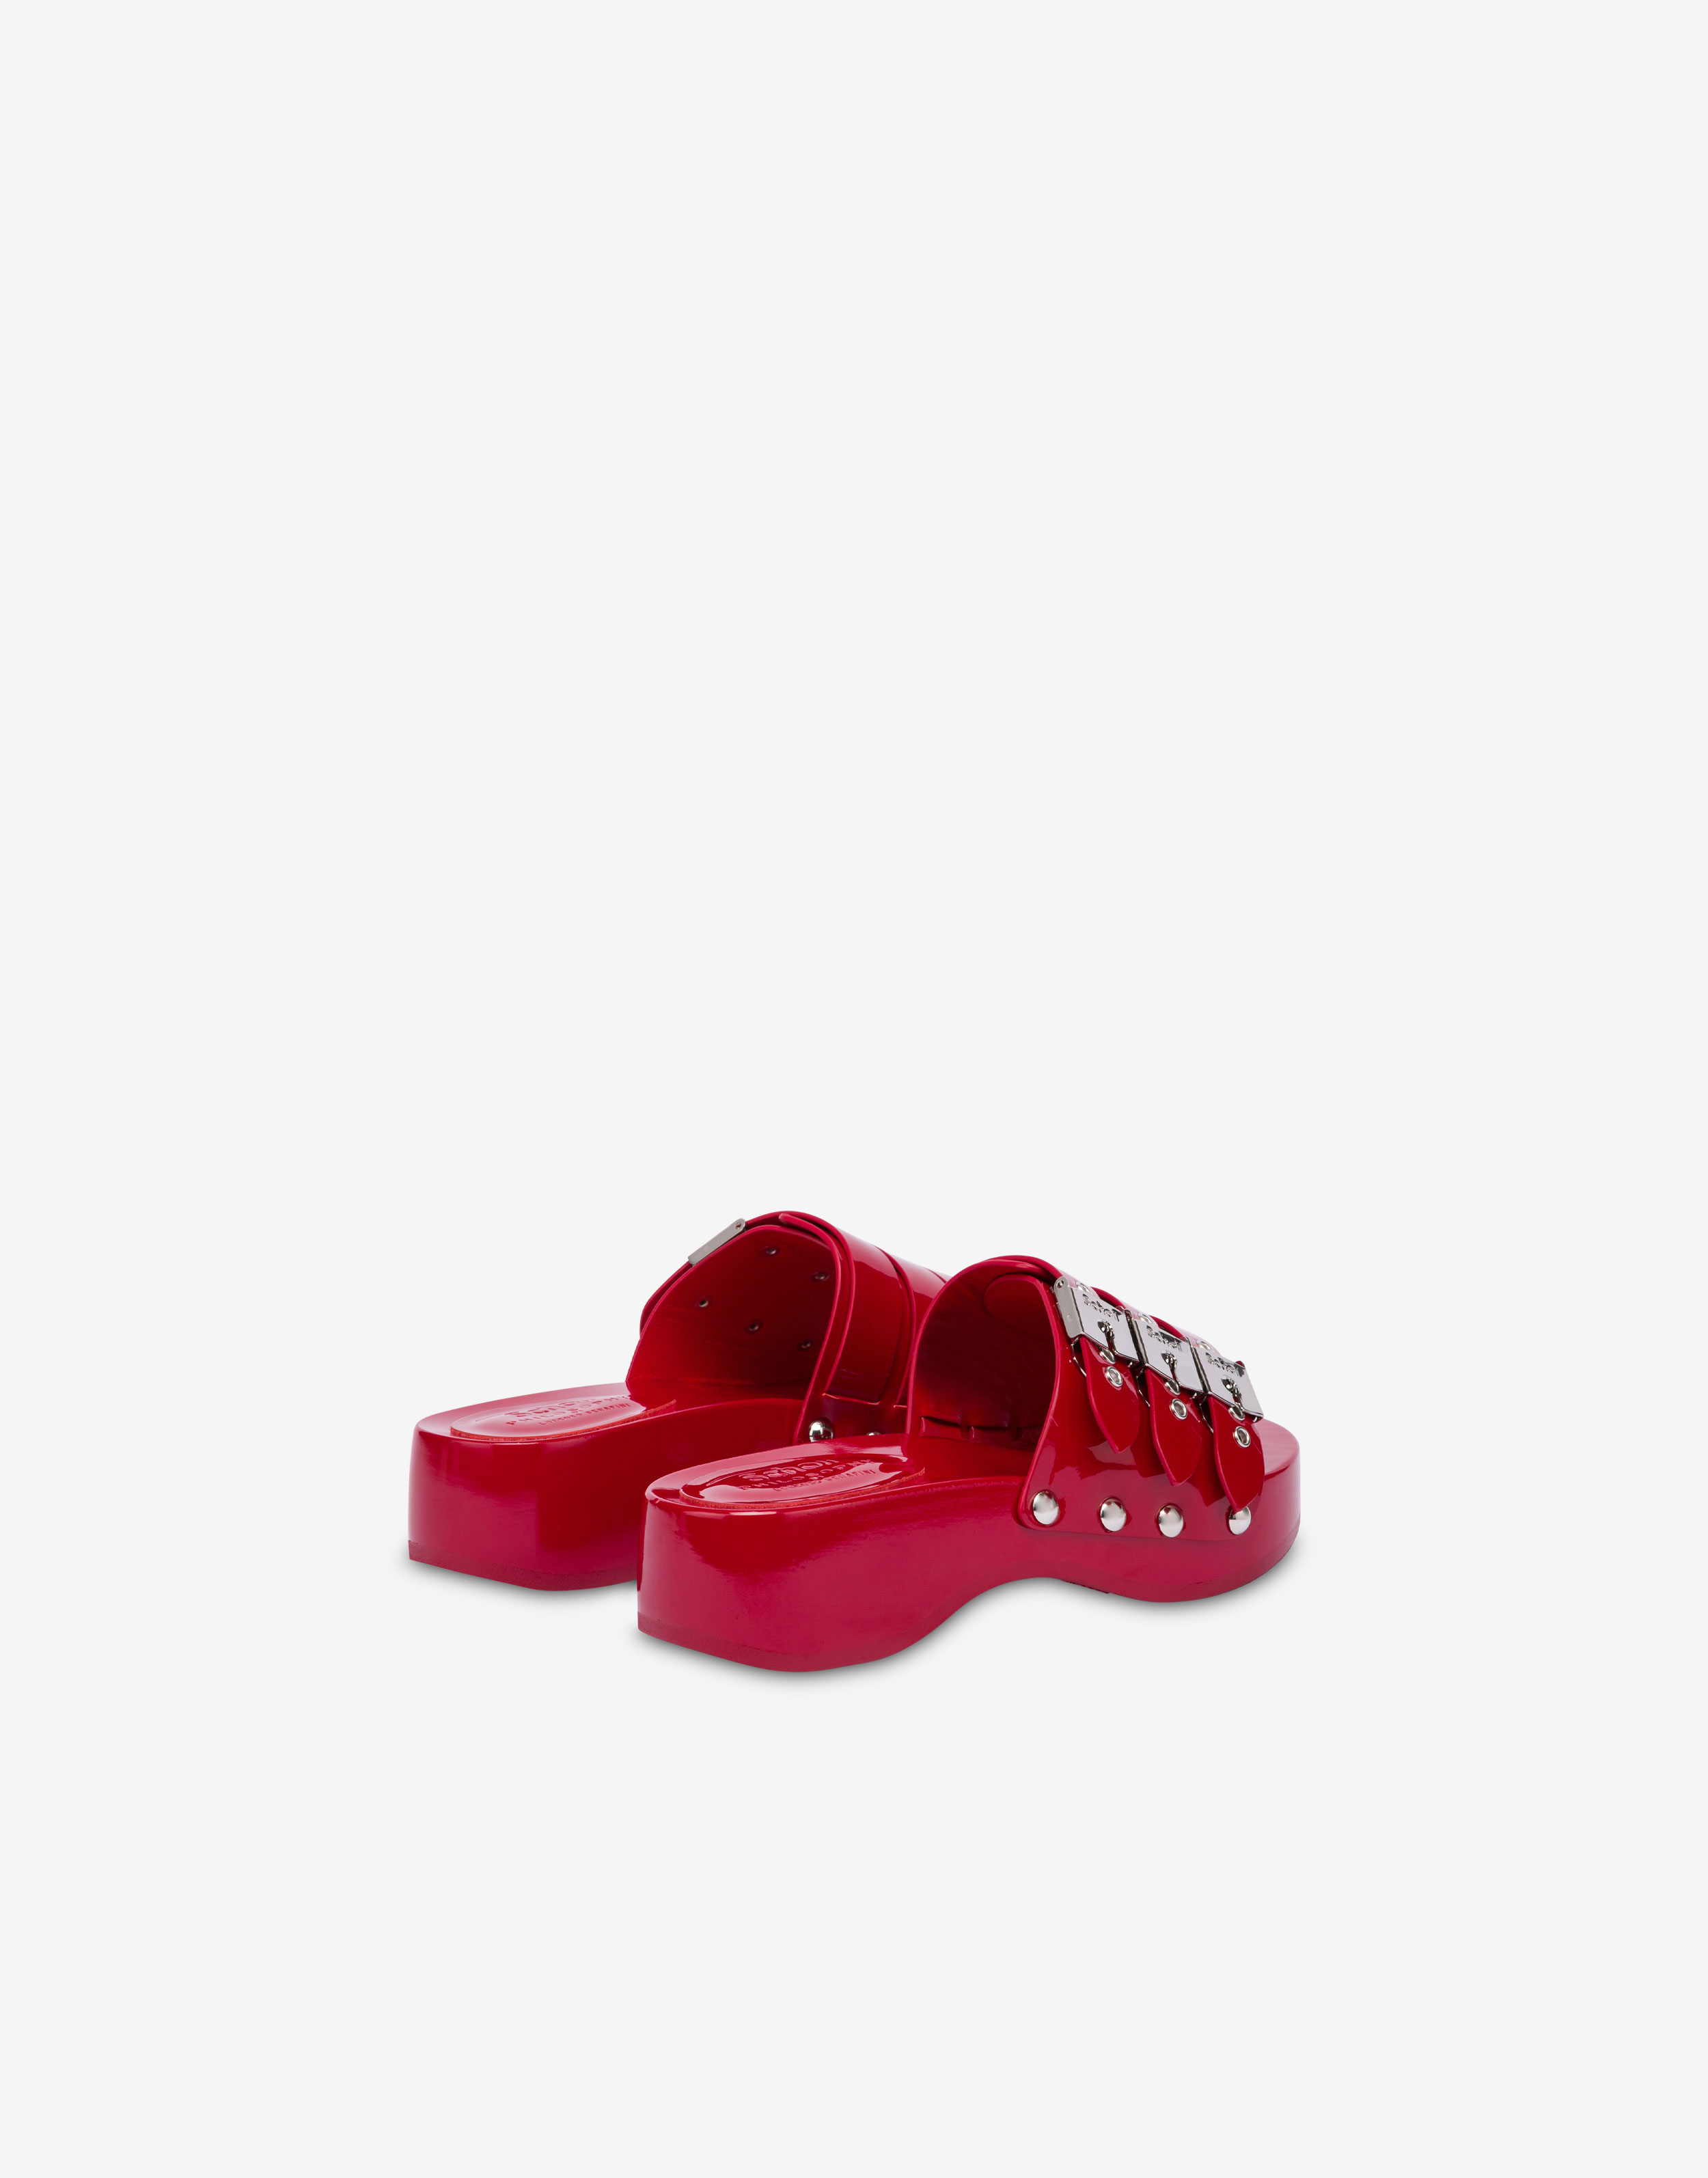 Philosophy x Scholl patent leather clog